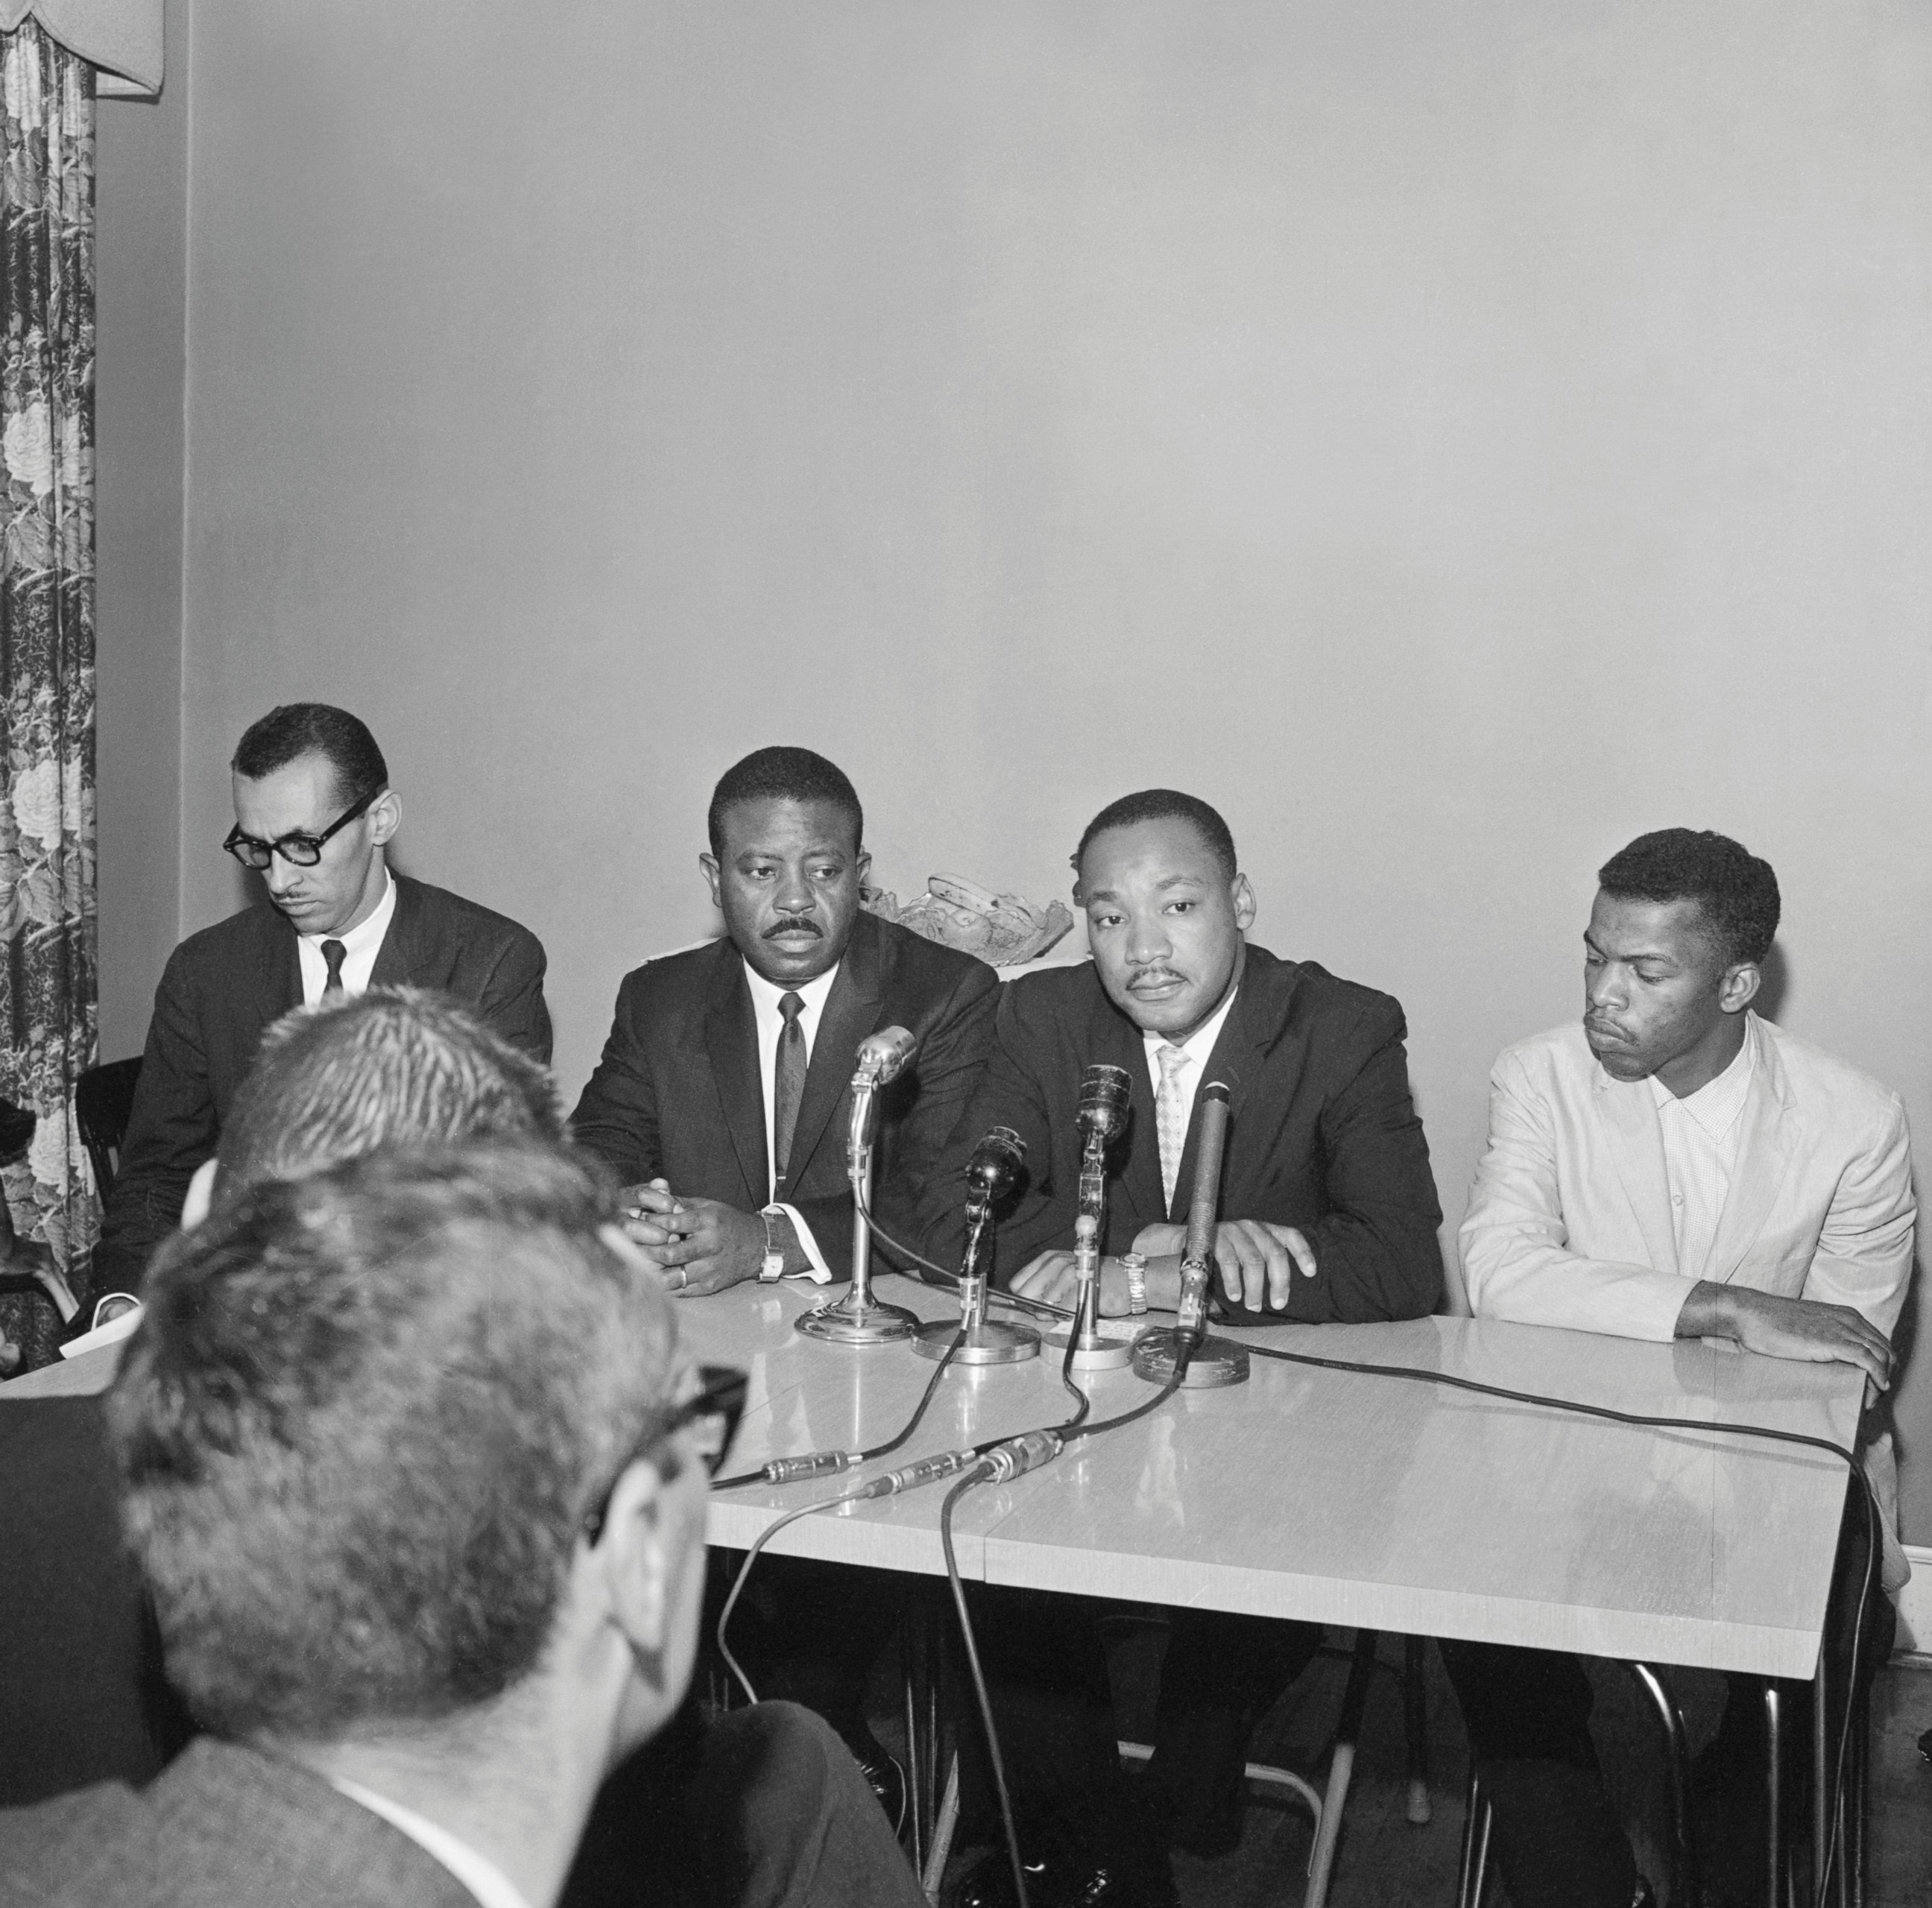 PHOTO: Leaders of the Freedom Riders, from left, Reverend Ralph Abernathy, Reverend Martin Luther King Jr., and John Lewis hold a press conference in Montgomery, Alabama. 